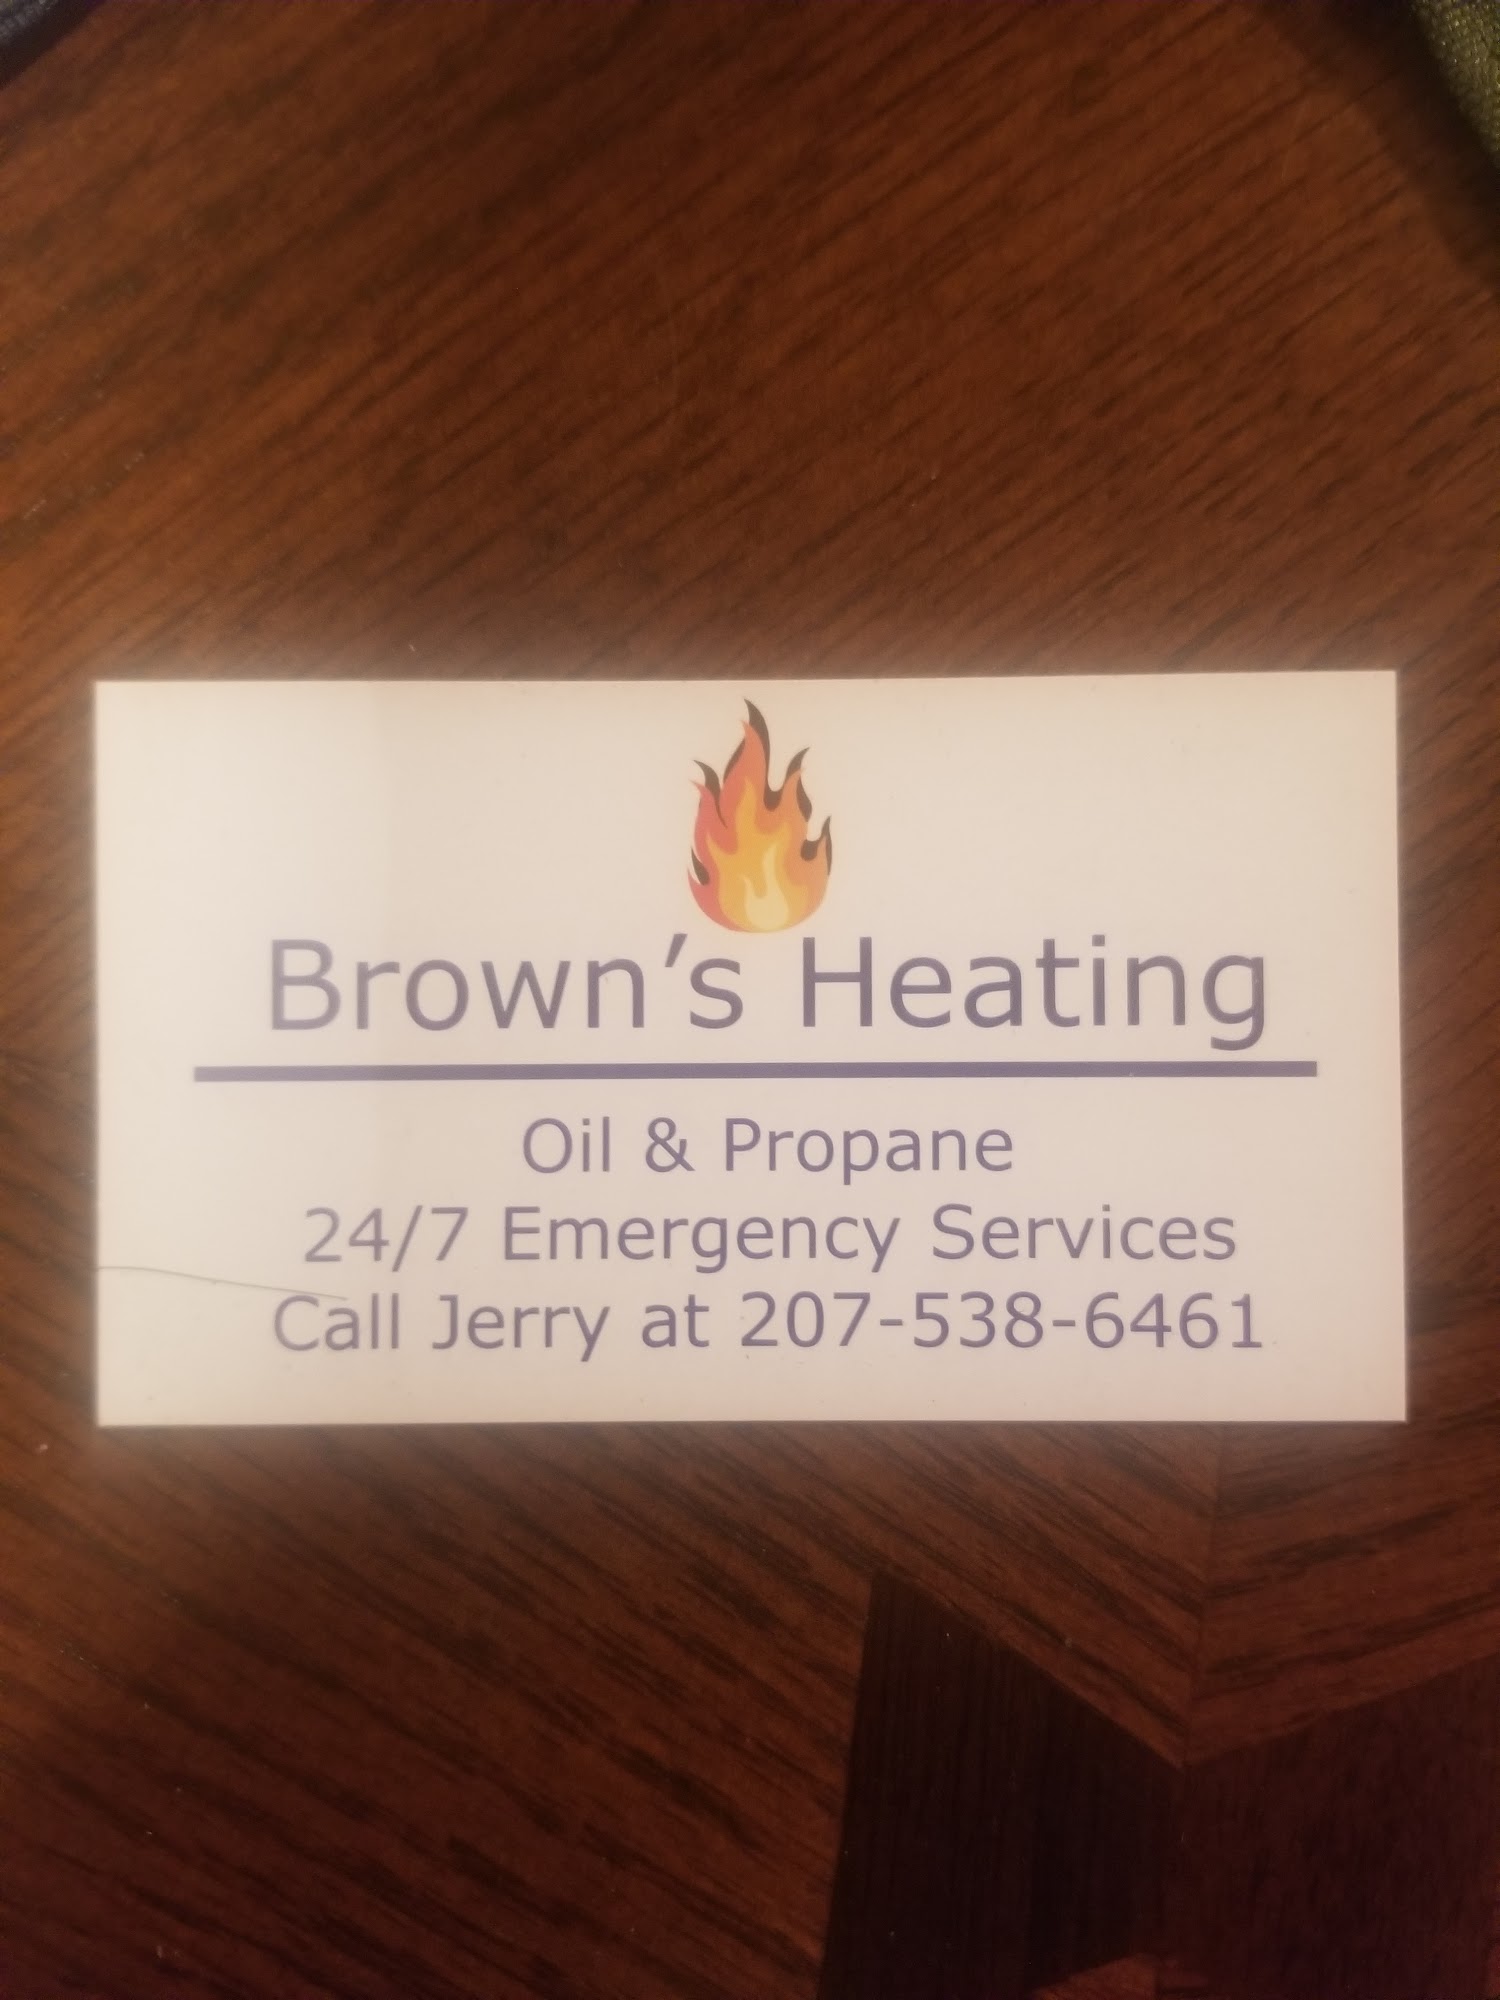 Browns Heating 337 Court St, Houlton Maine 04730